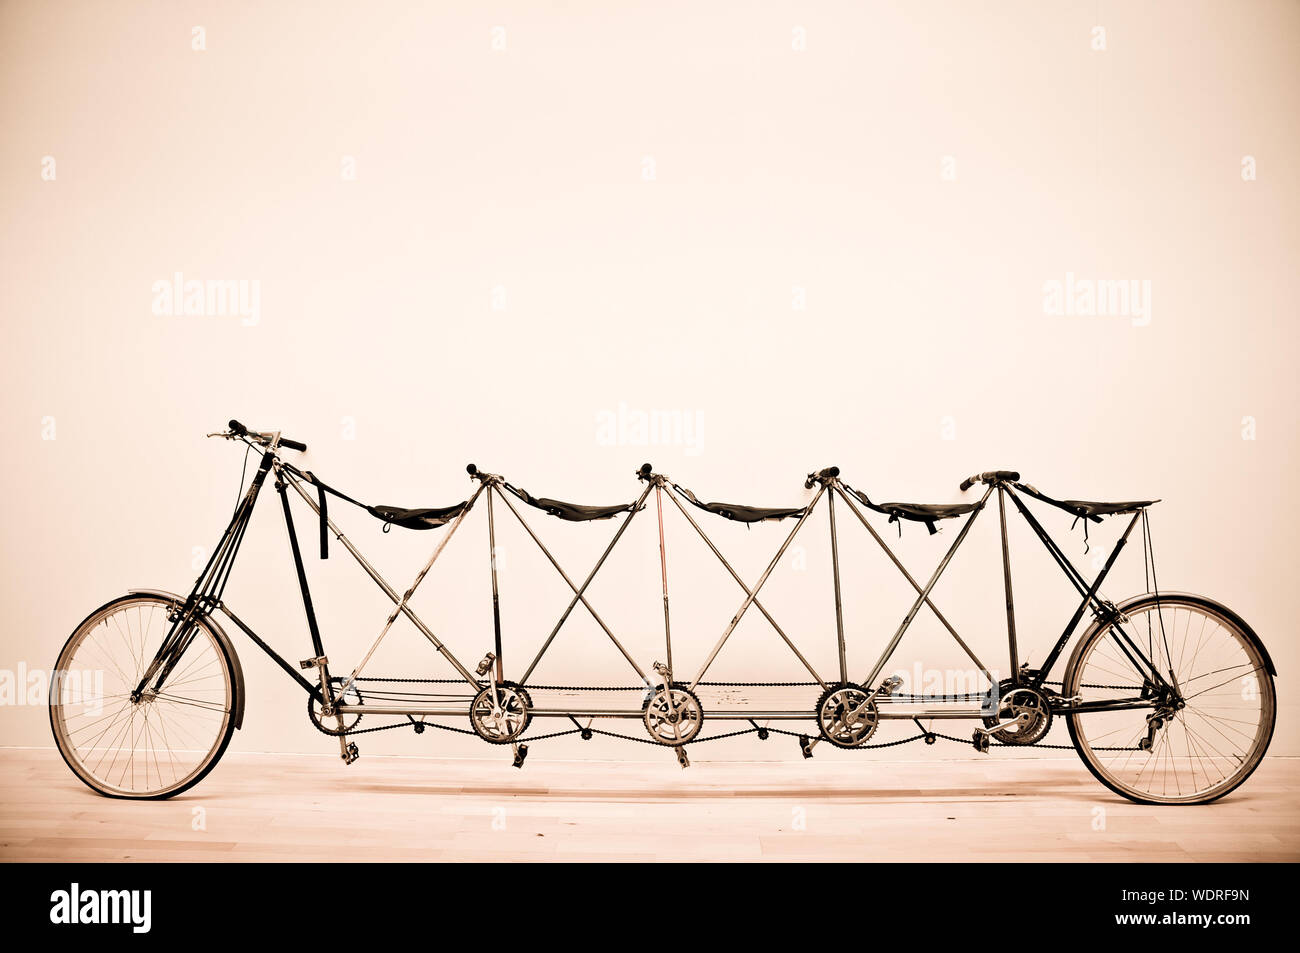 Five Seater Tandem Bicycle Stock Photo Alamy